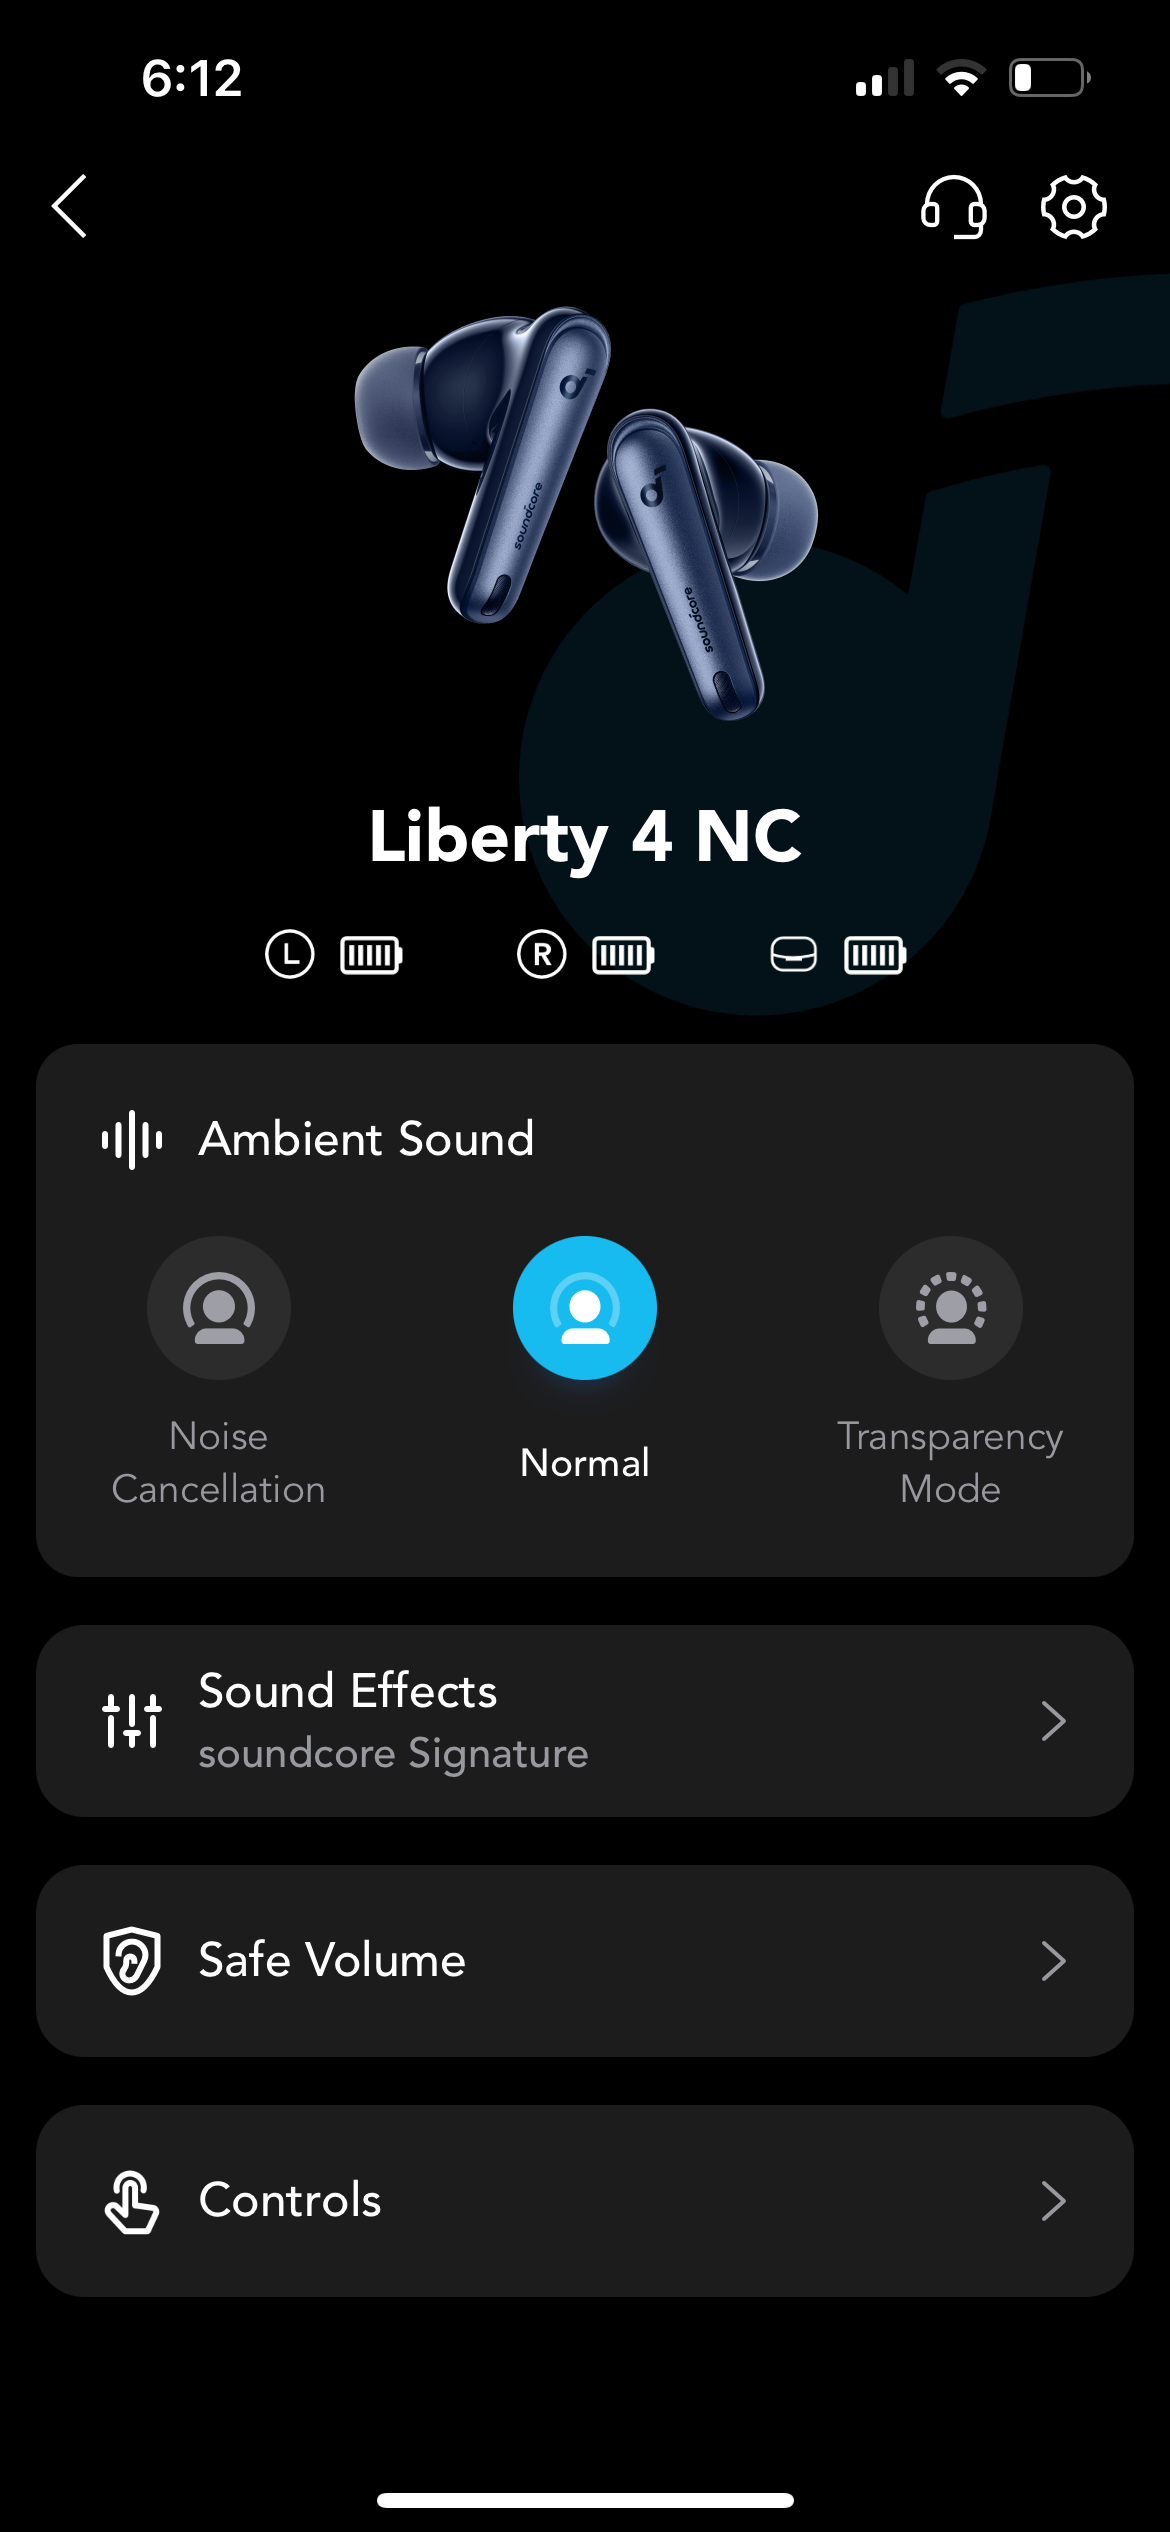 soundcore by Anker Liberty 4 NC White – Ankerinnovation